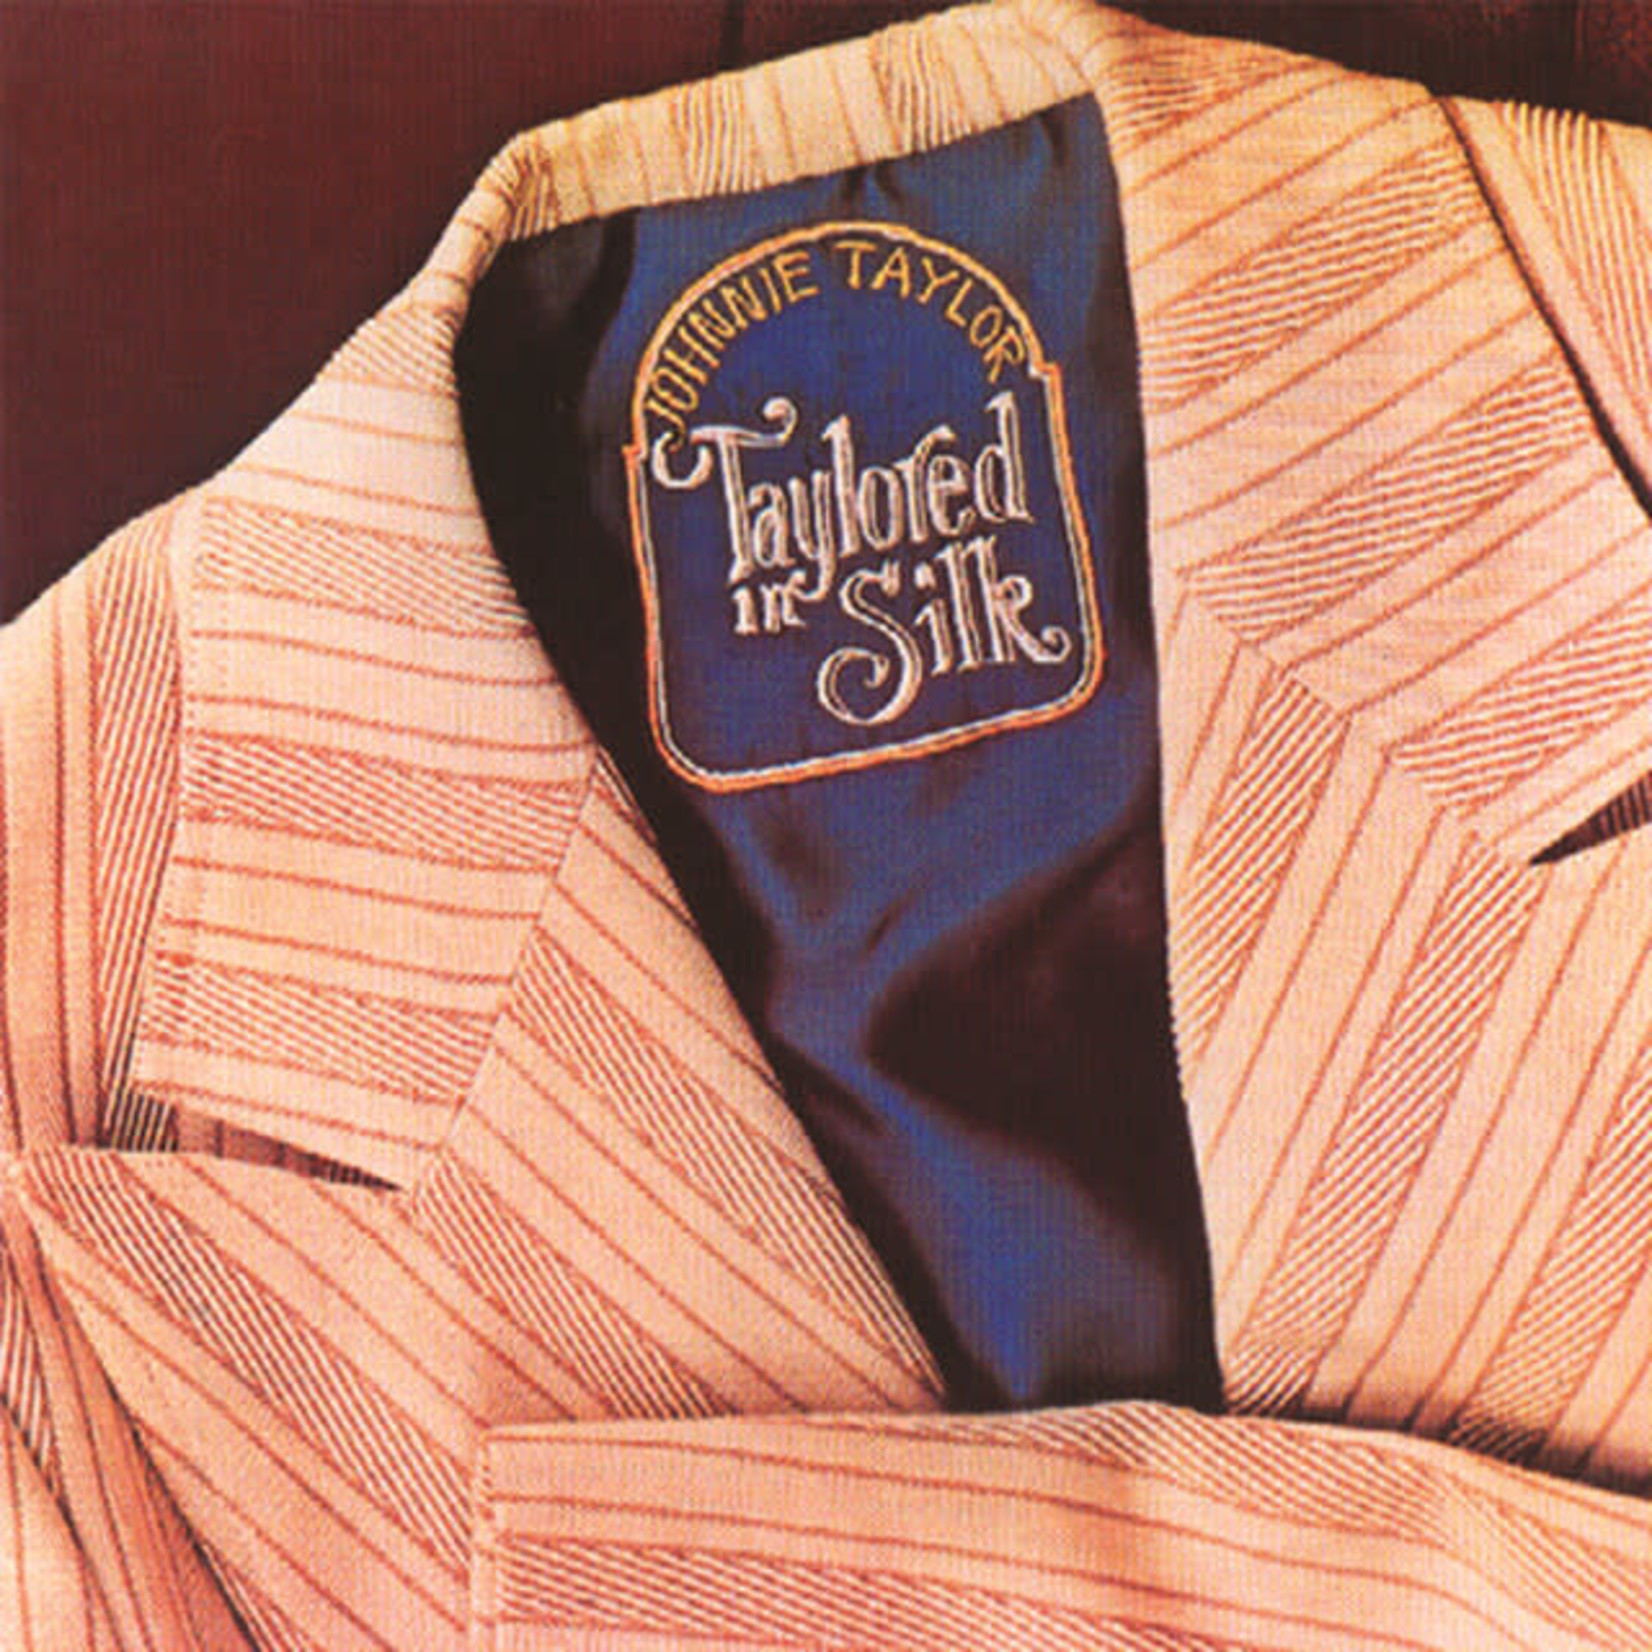 [Discontinued] Johnnie Taylor - Taylored in Silk